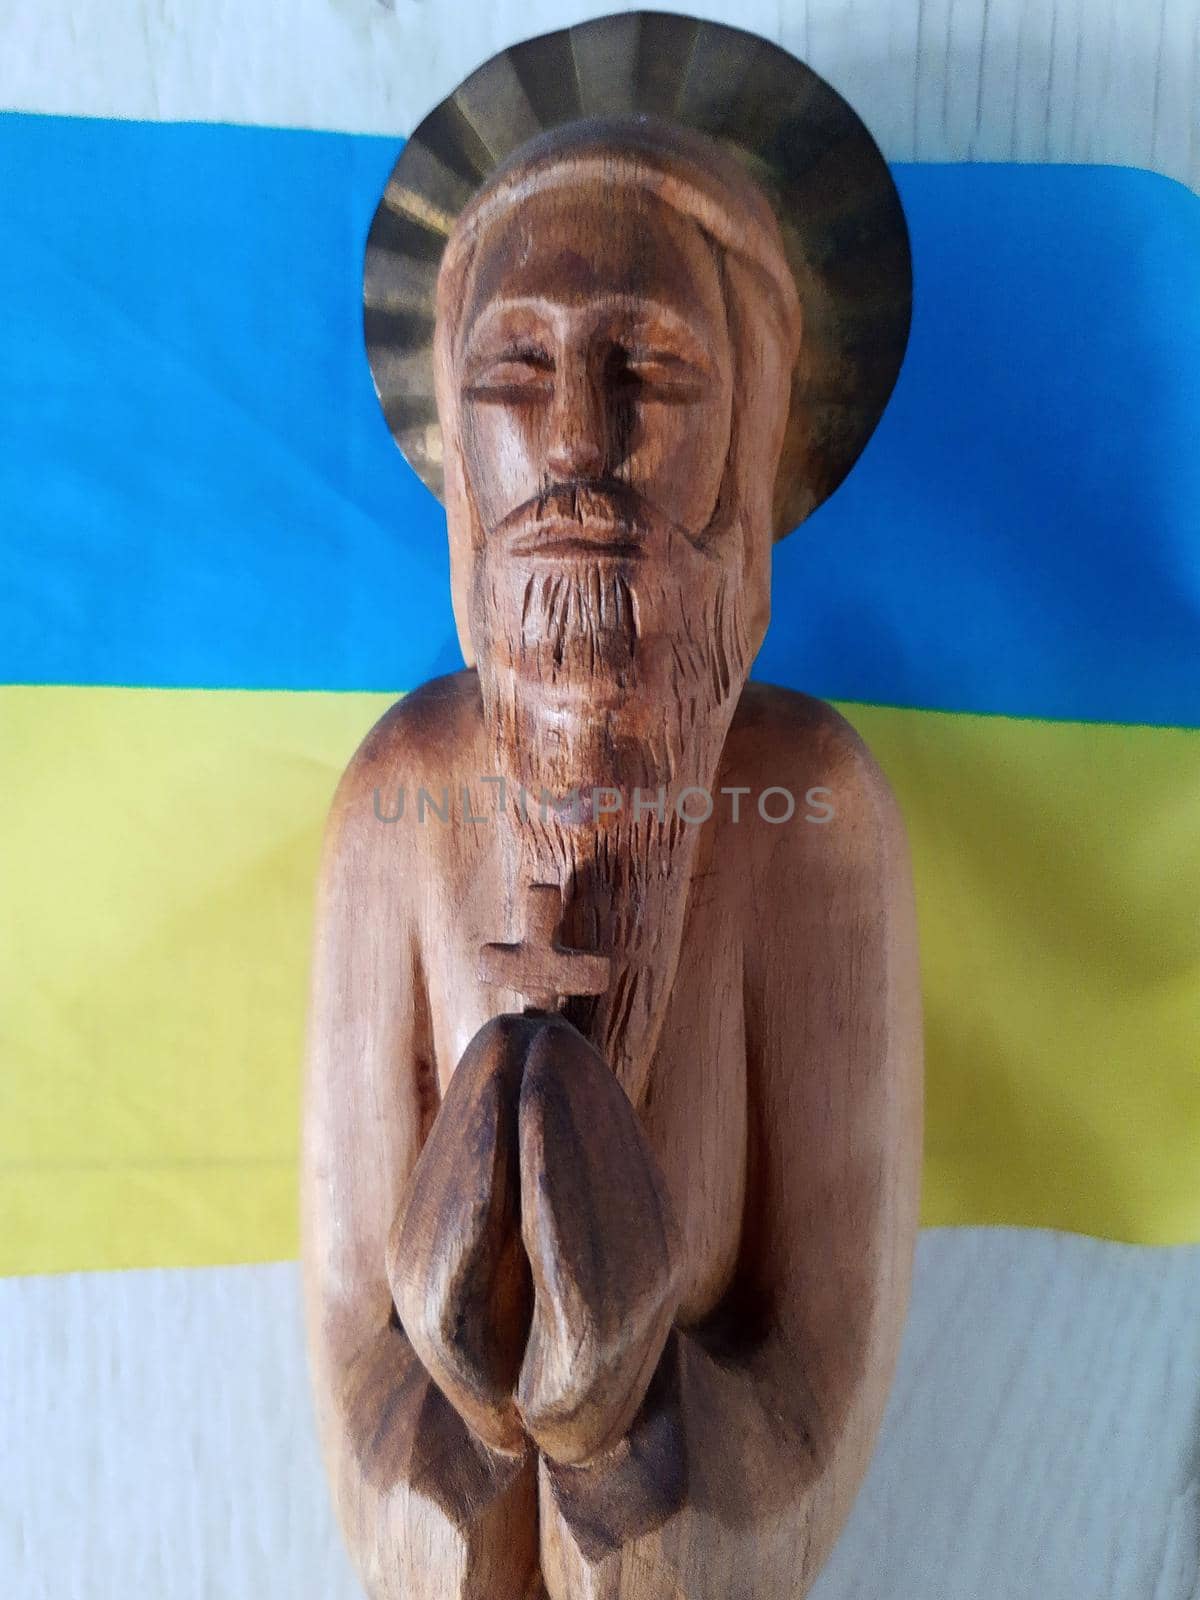 Wooden figurine of the saint against the background of the yellow-blue Ukrainian flag.